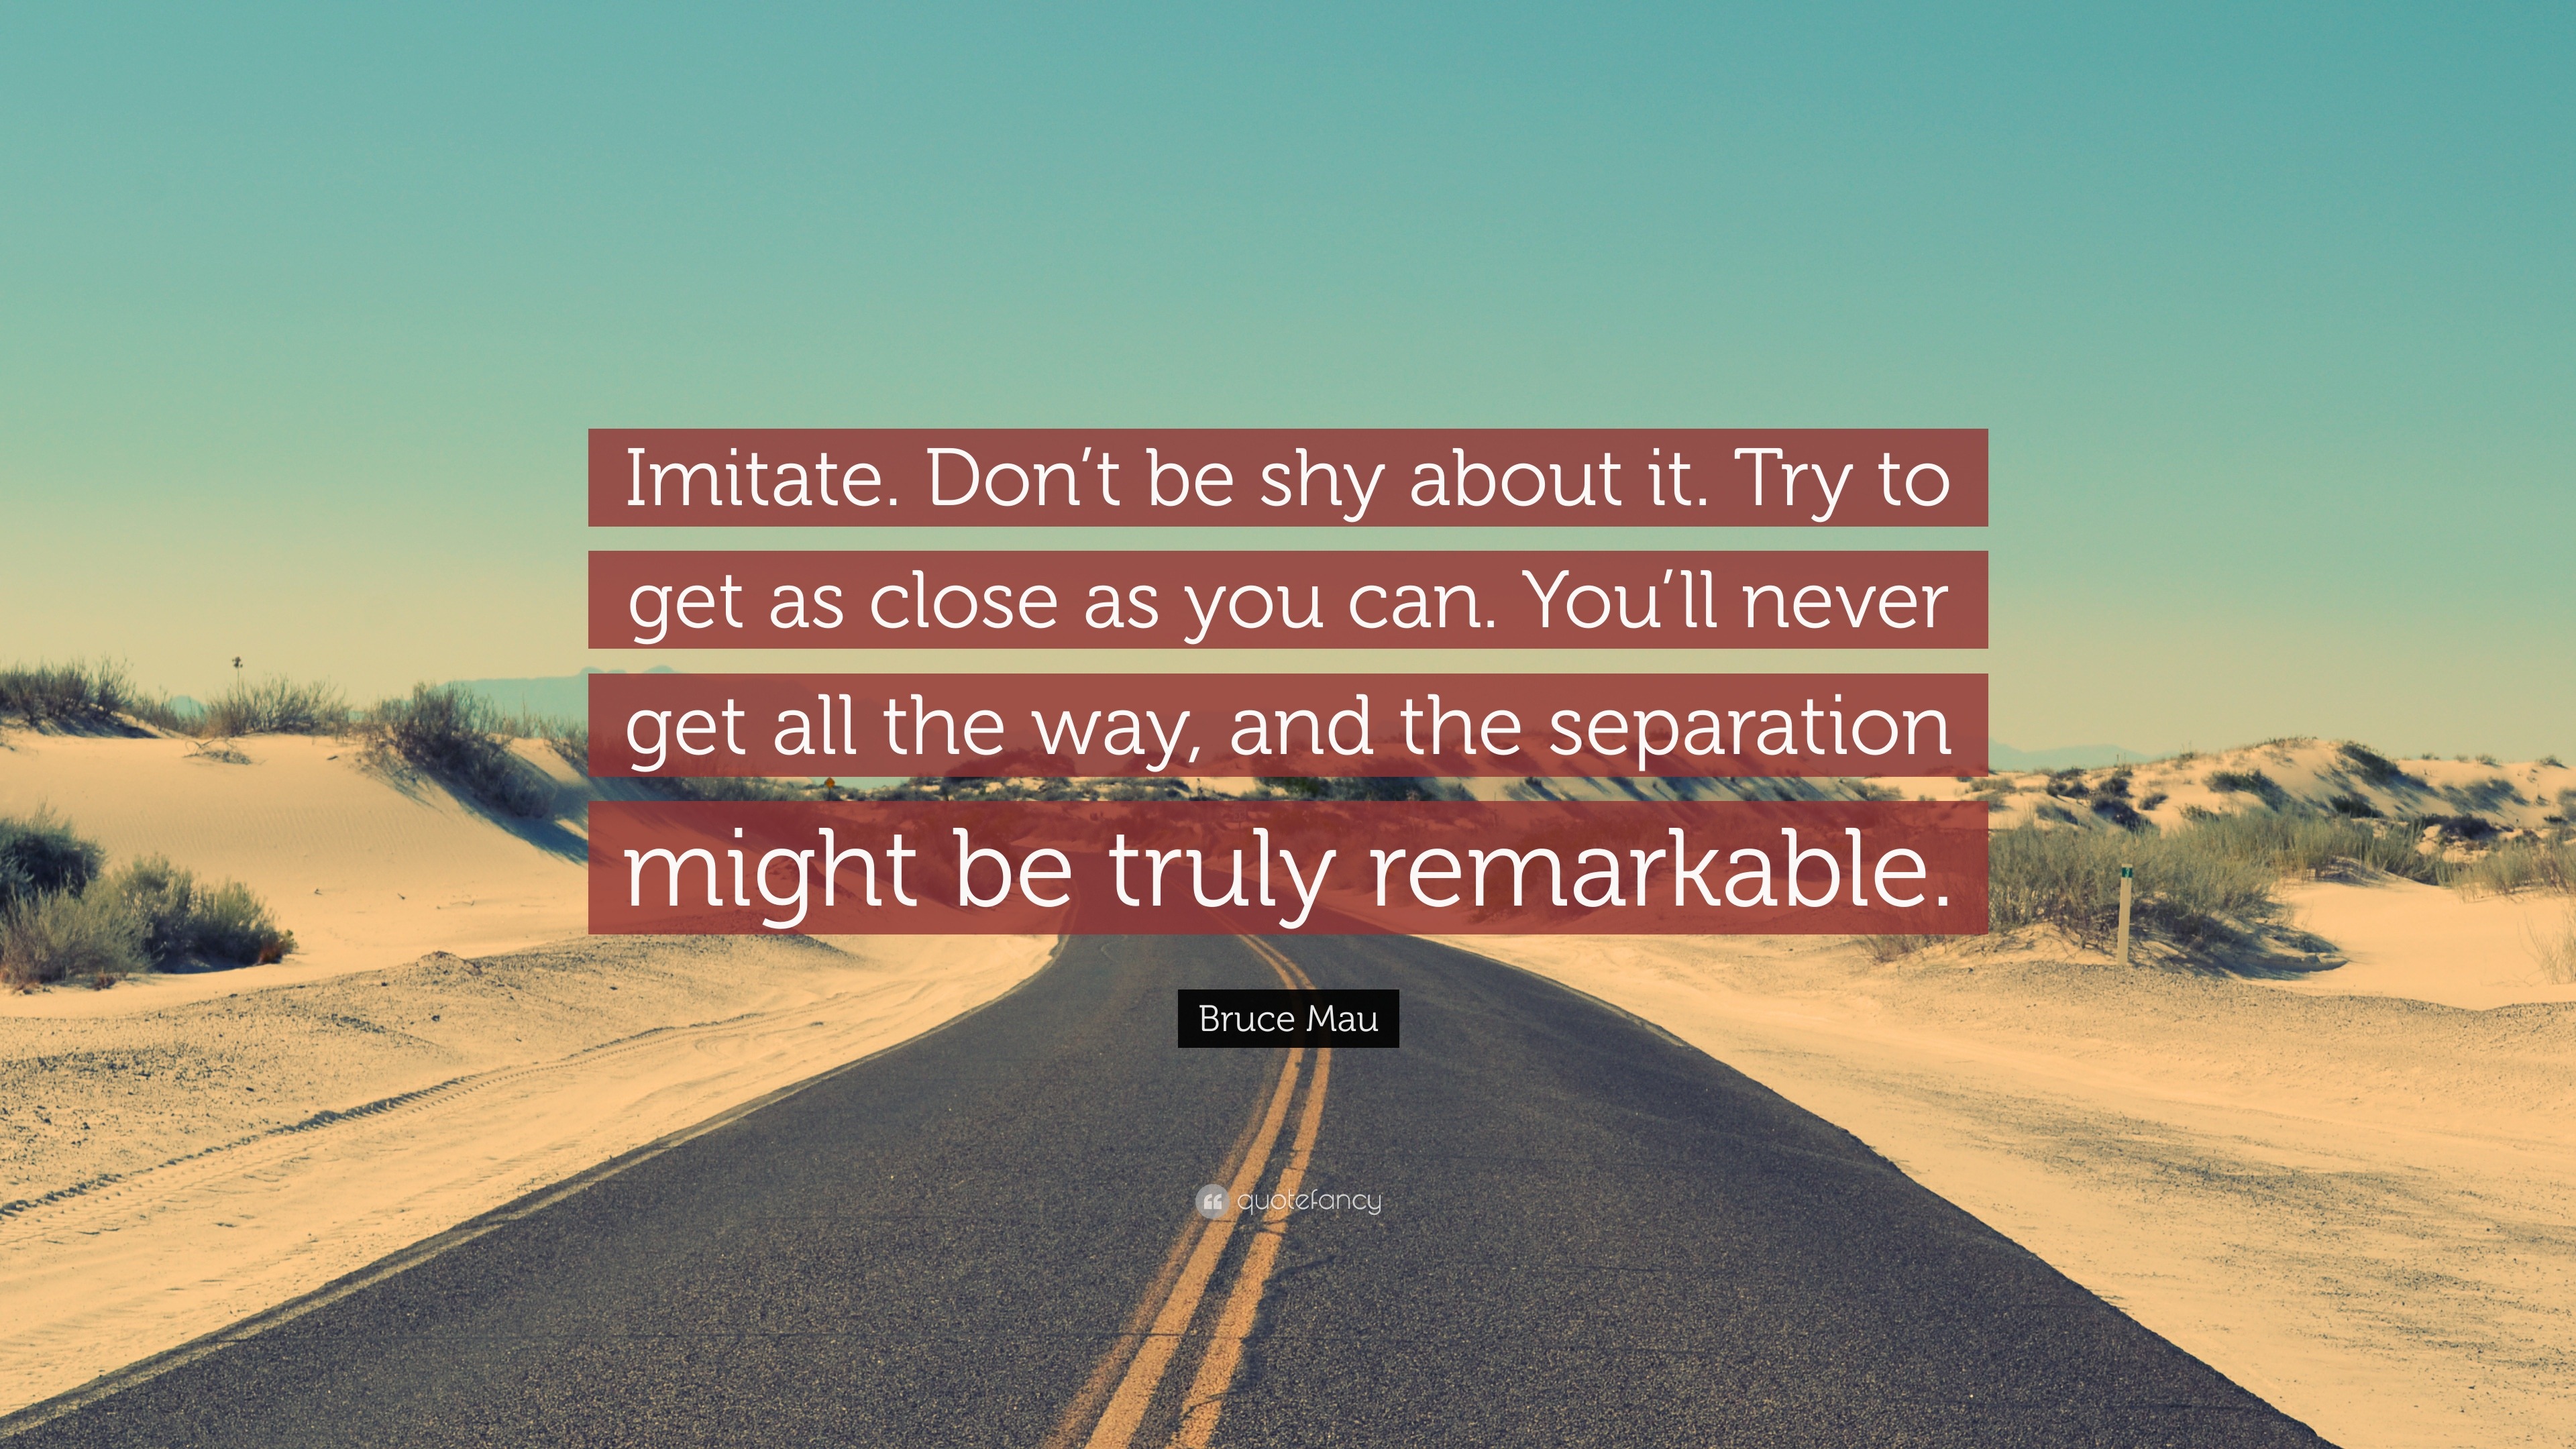 Bruce Mau Quote: “Imitate. Don't be shy about it. Try to get as